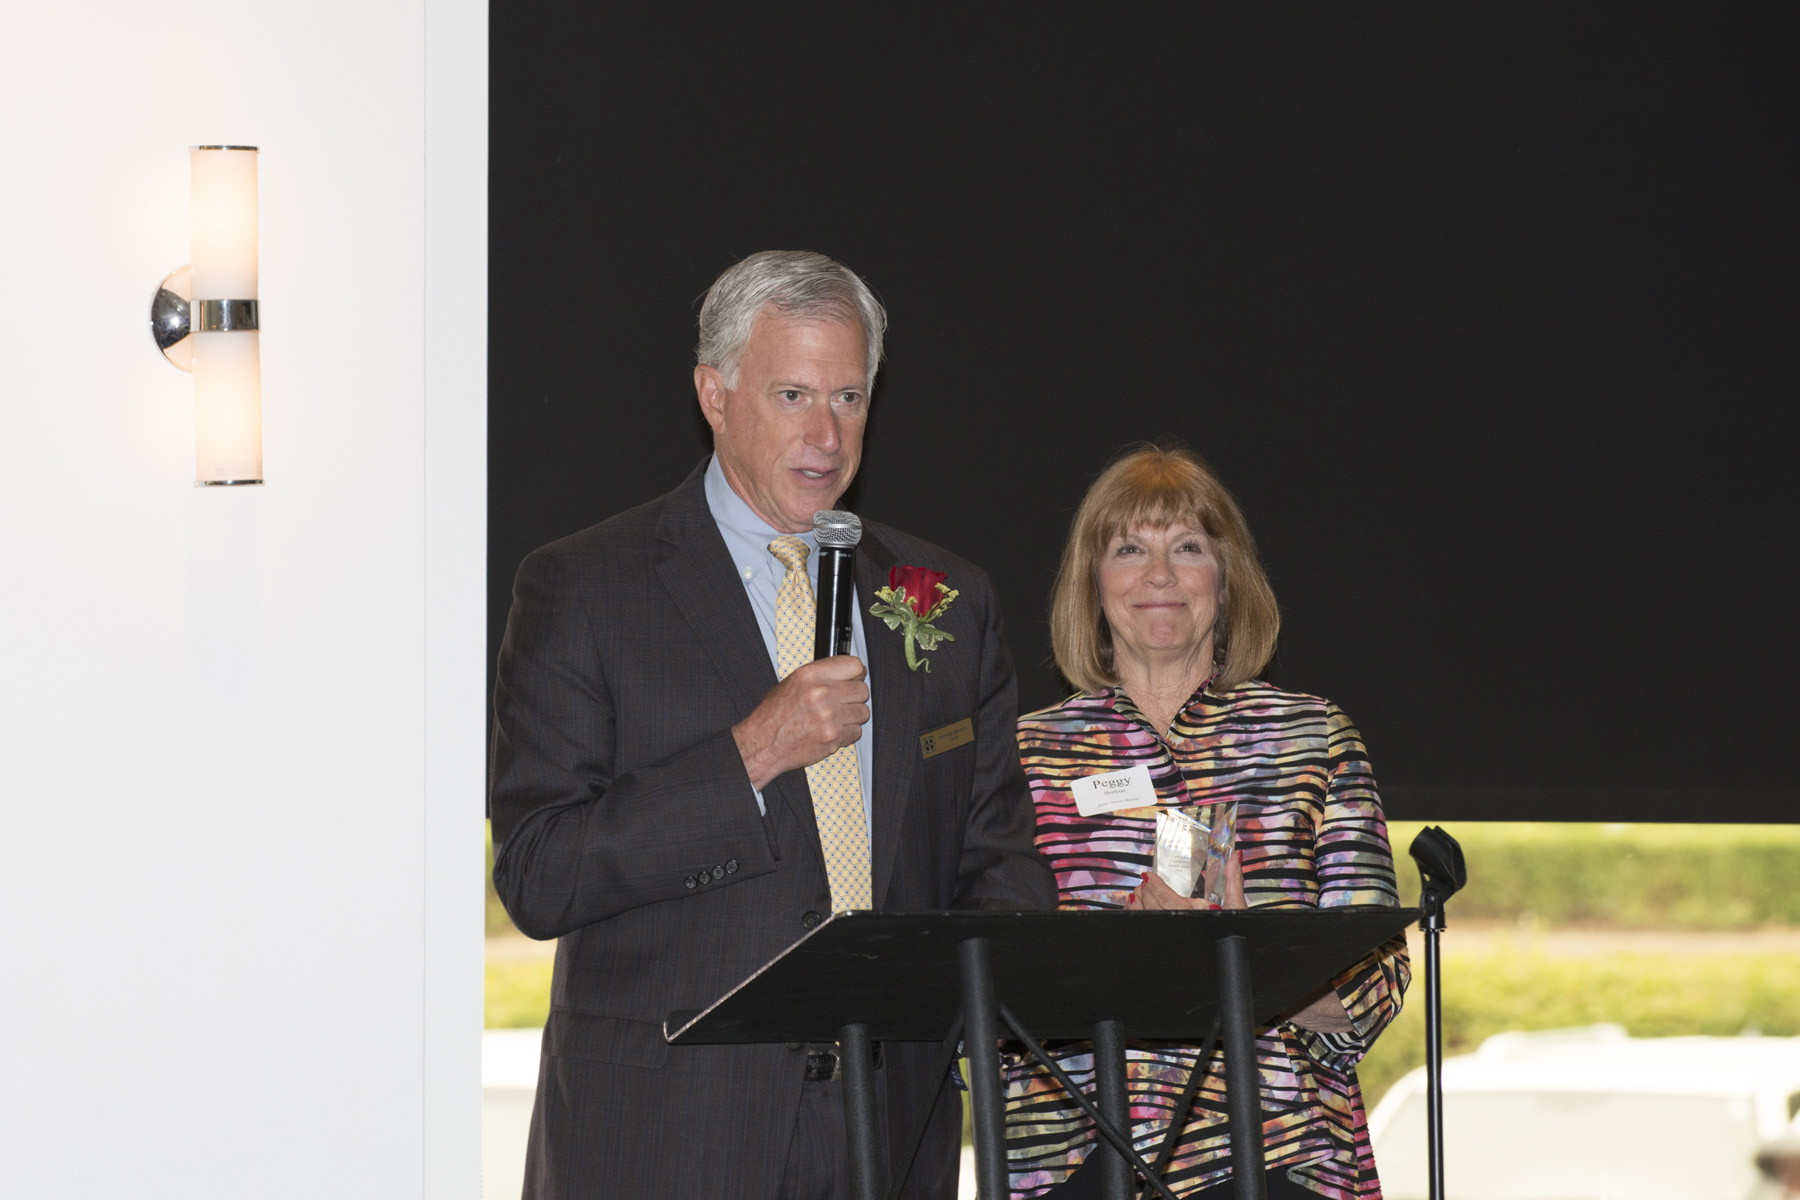 Michael and Peggy Borkon speaking to the room after accepting the 2018 Foundation Fellow Award